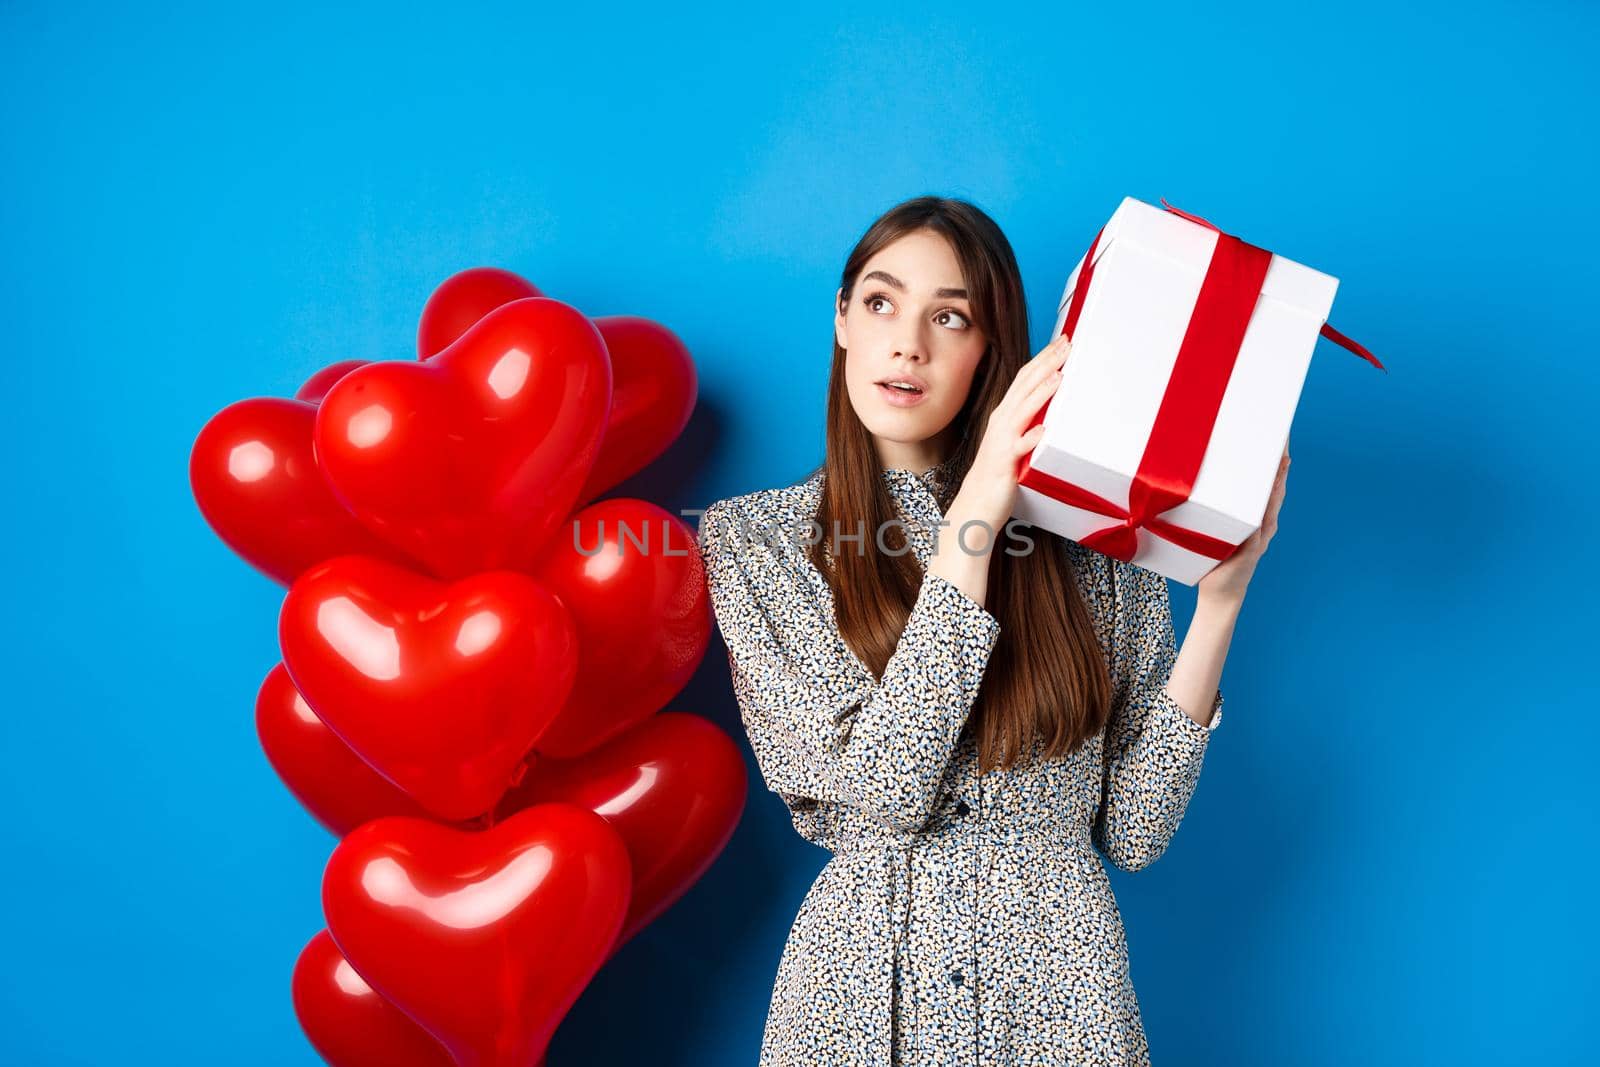 Valentines day. Beautiful woman shaking gift box to guess what inside, look dreamy, celebrating lovers holiday, standing near red hearts, blue background.